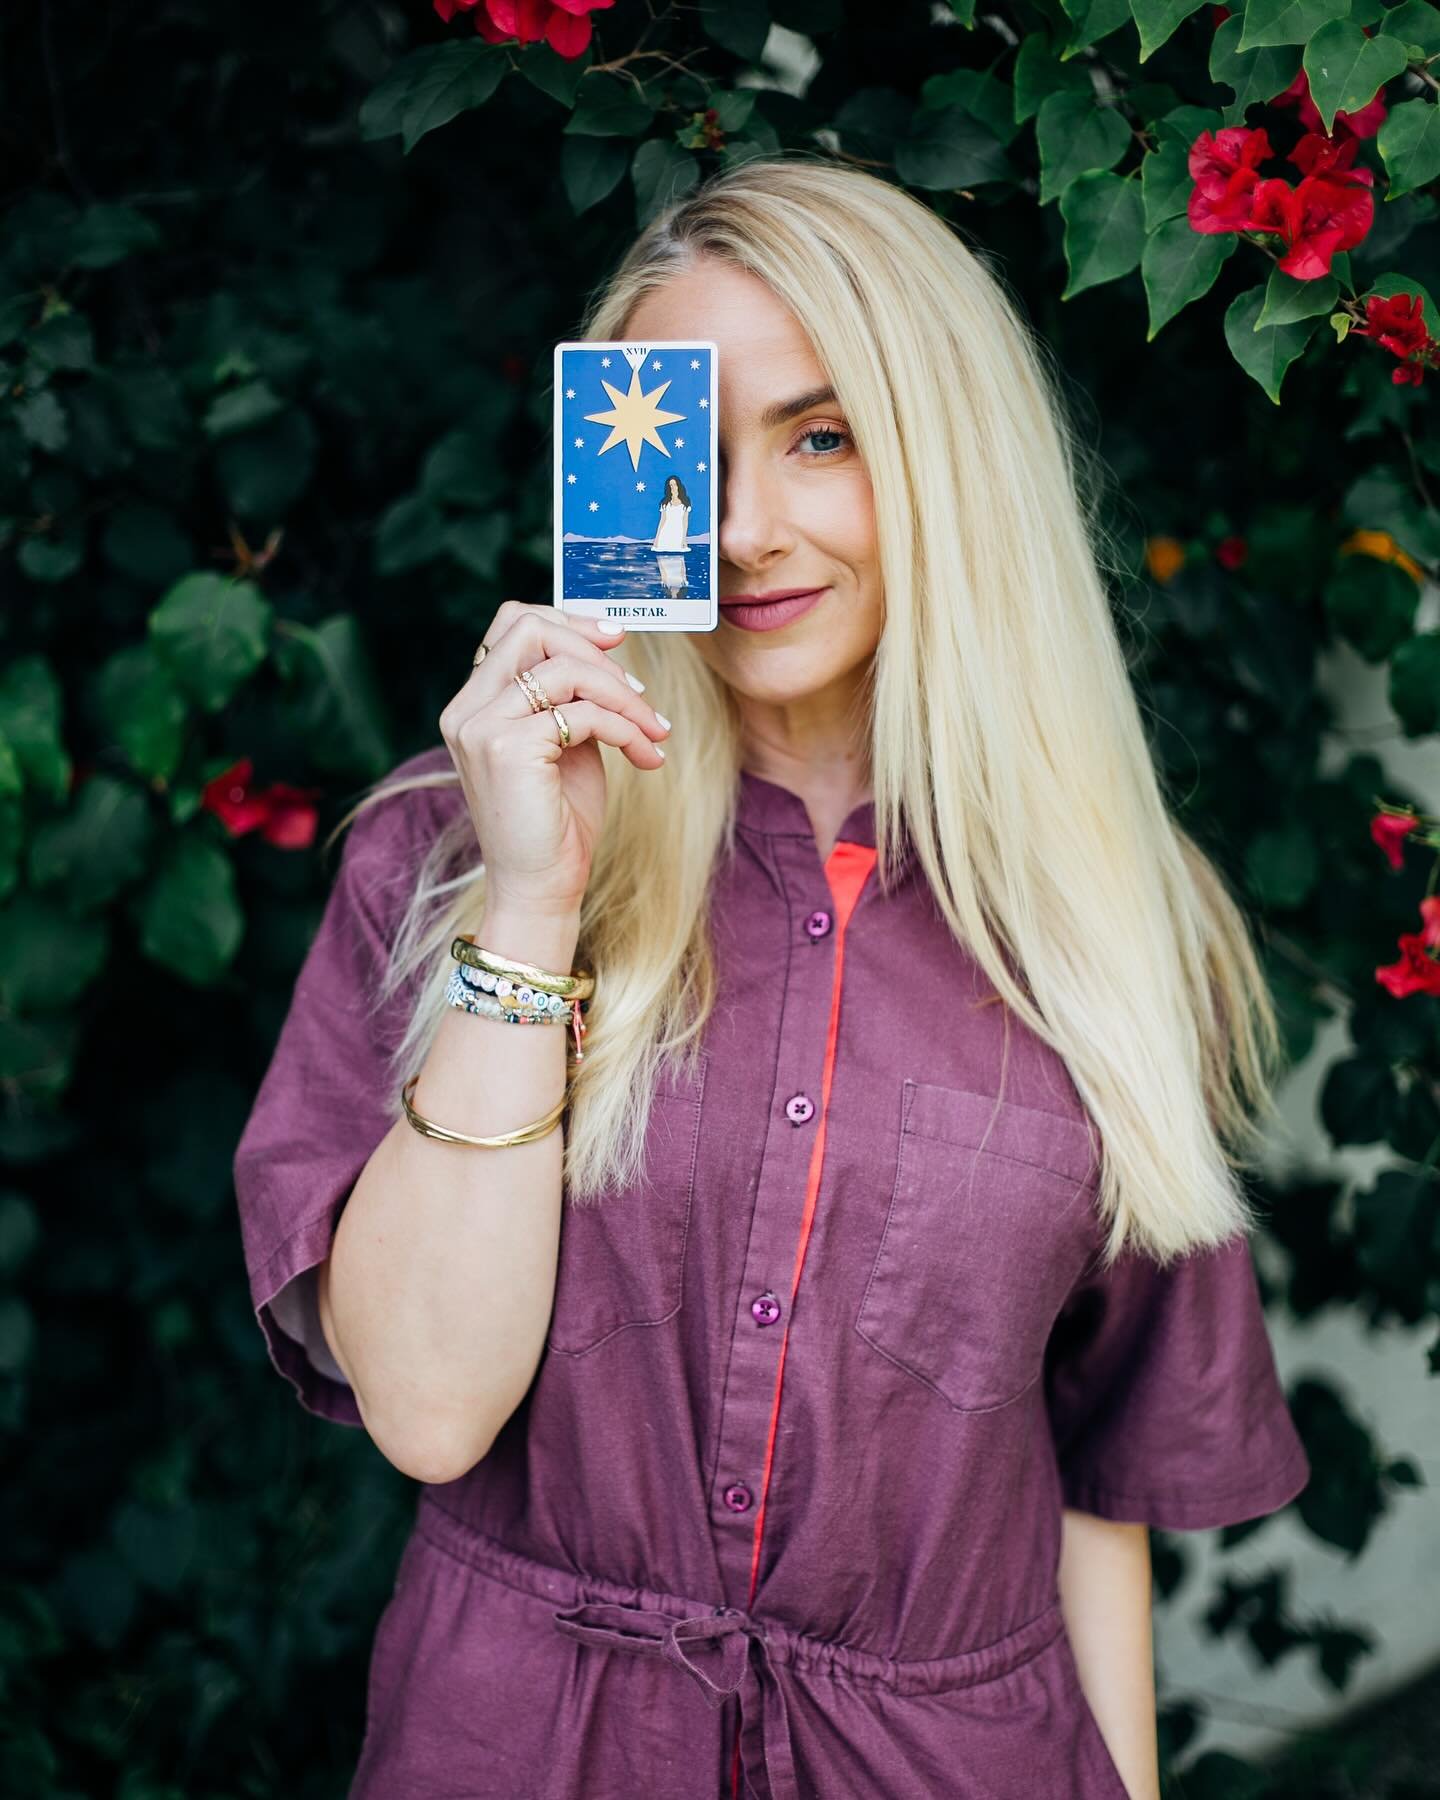 🪐 ON AN EXCITING + PERSONAL NOTE: For the last 2+ years, my friend @angiebanicki (also known as Hollywood&rsquo;s go-to Tarot Card Reader) and I have been working closely together designing a Tarot Deck - Angie channeling the cards&rsquo; messages t